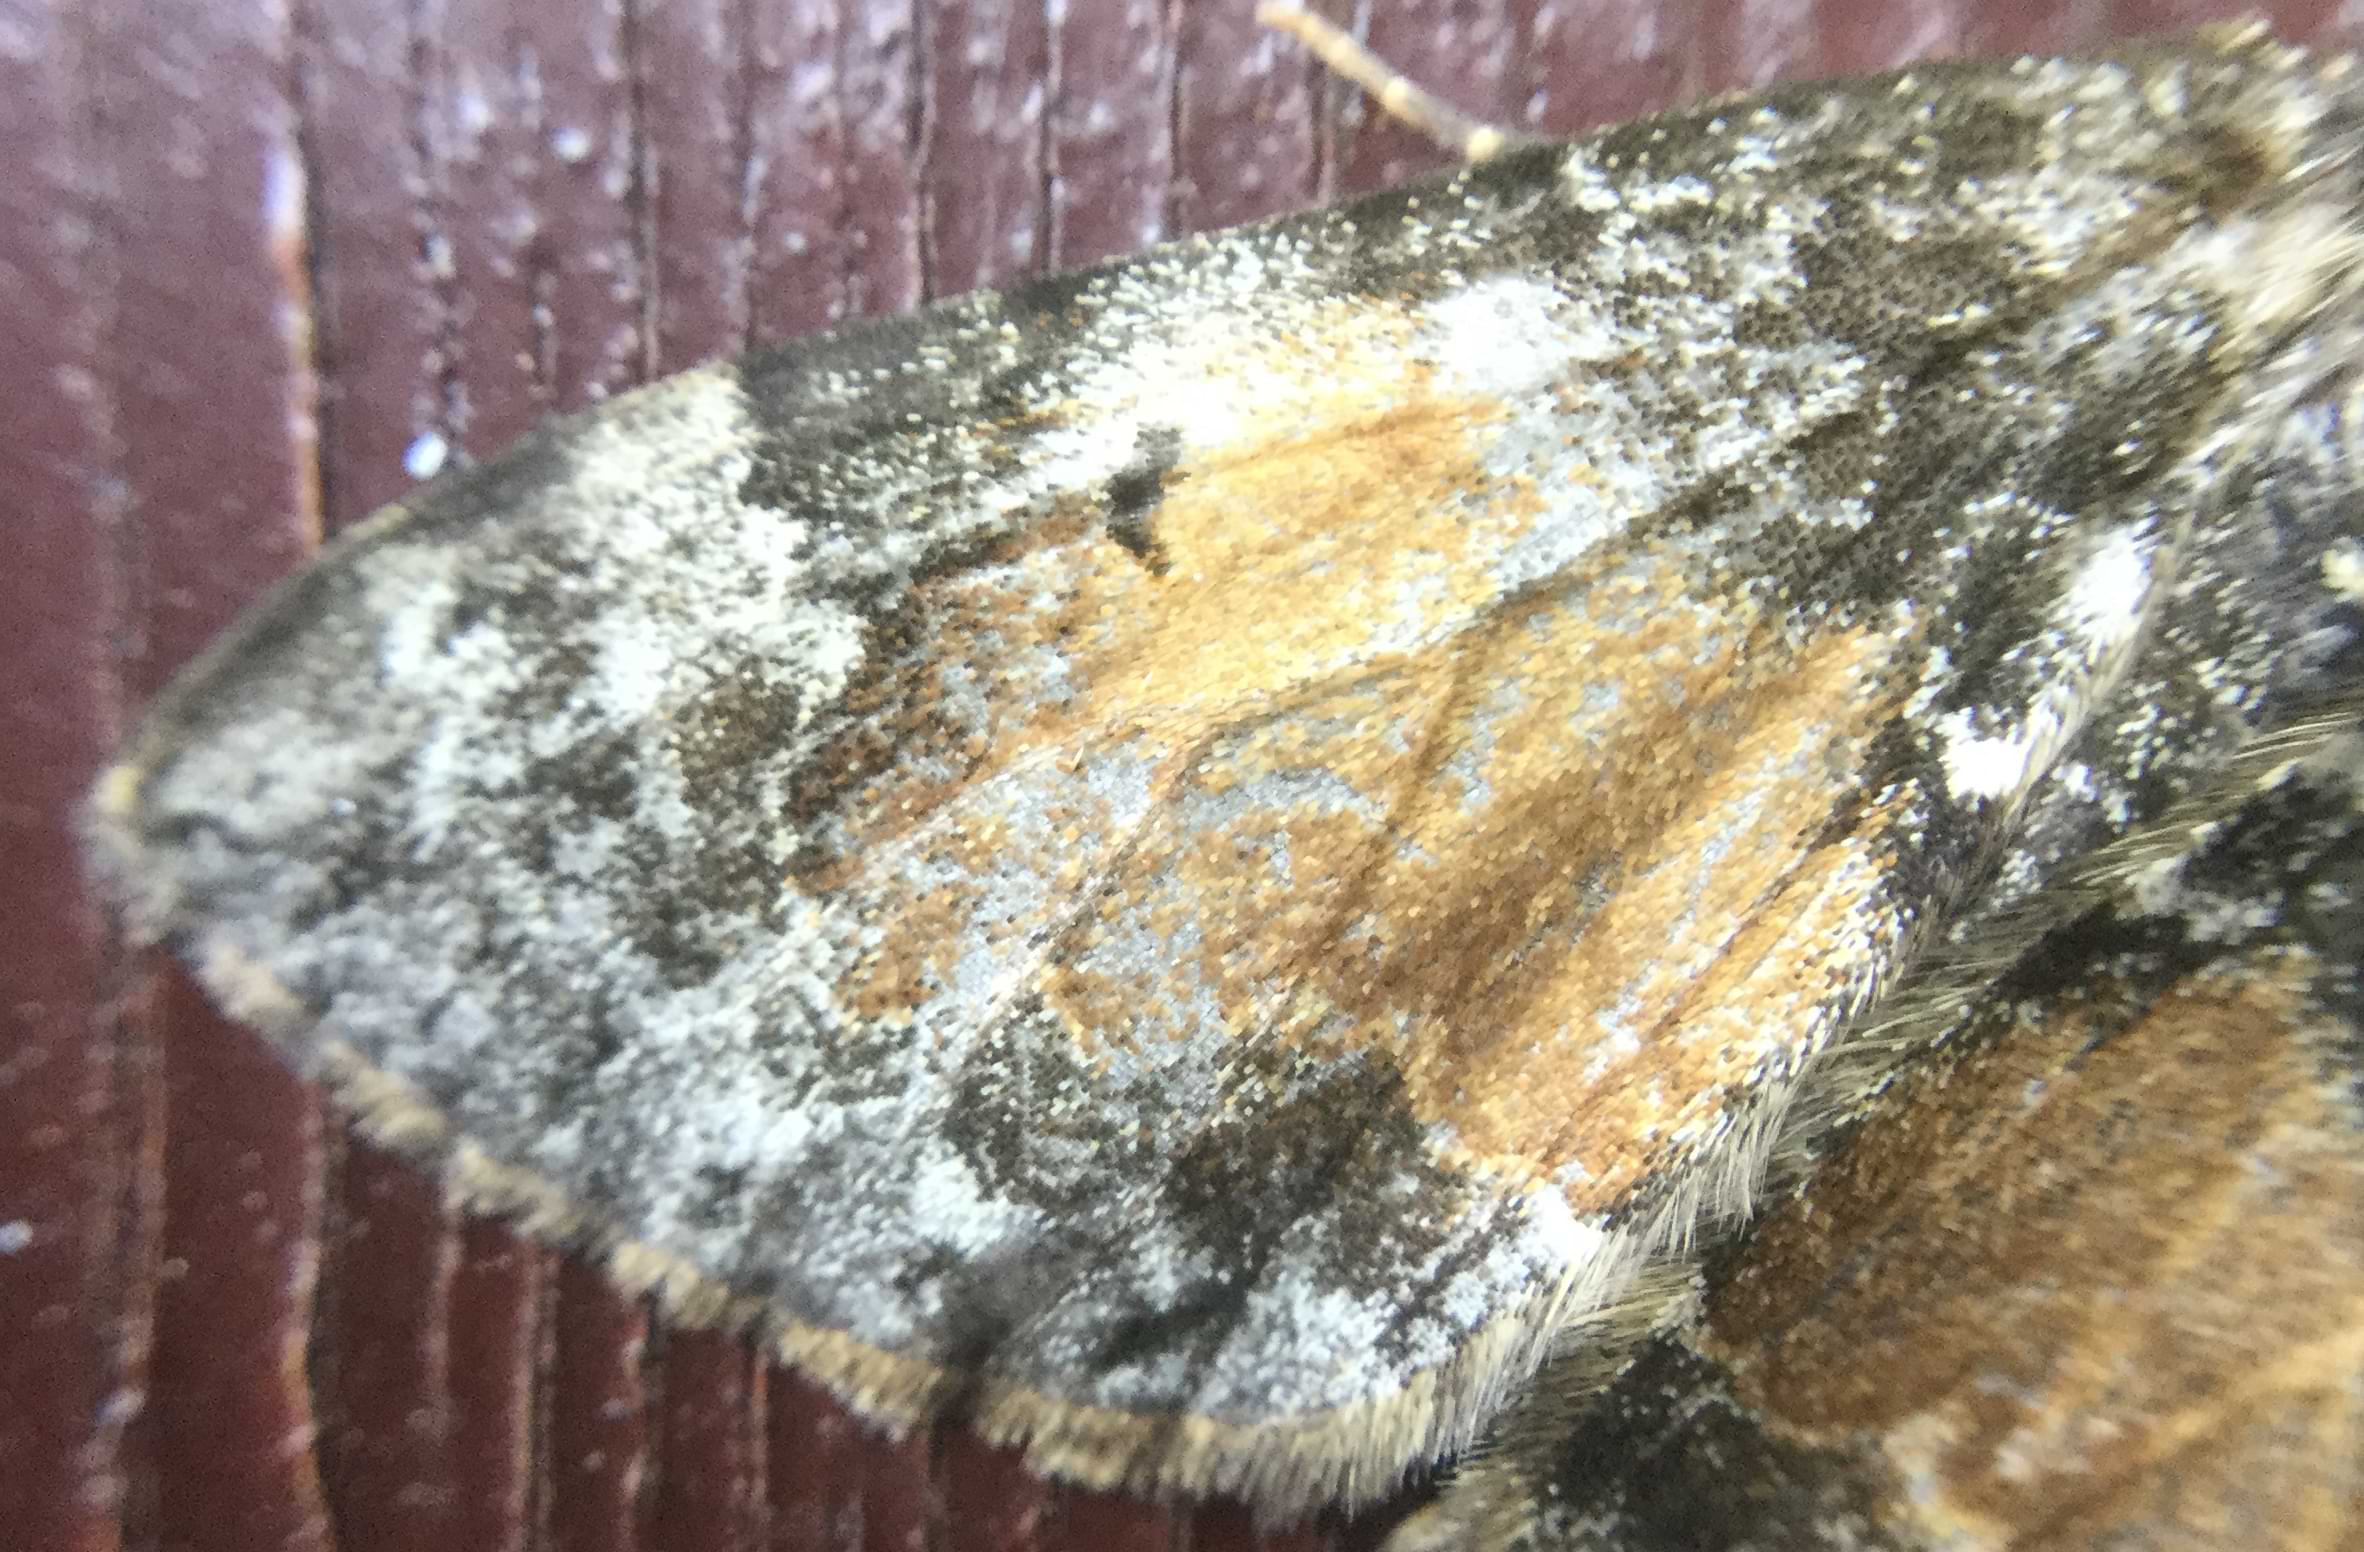 Image of the previous moth's wing. It is patterned with large patches of brown, white, and orange, and has fine hairs running around the edges.